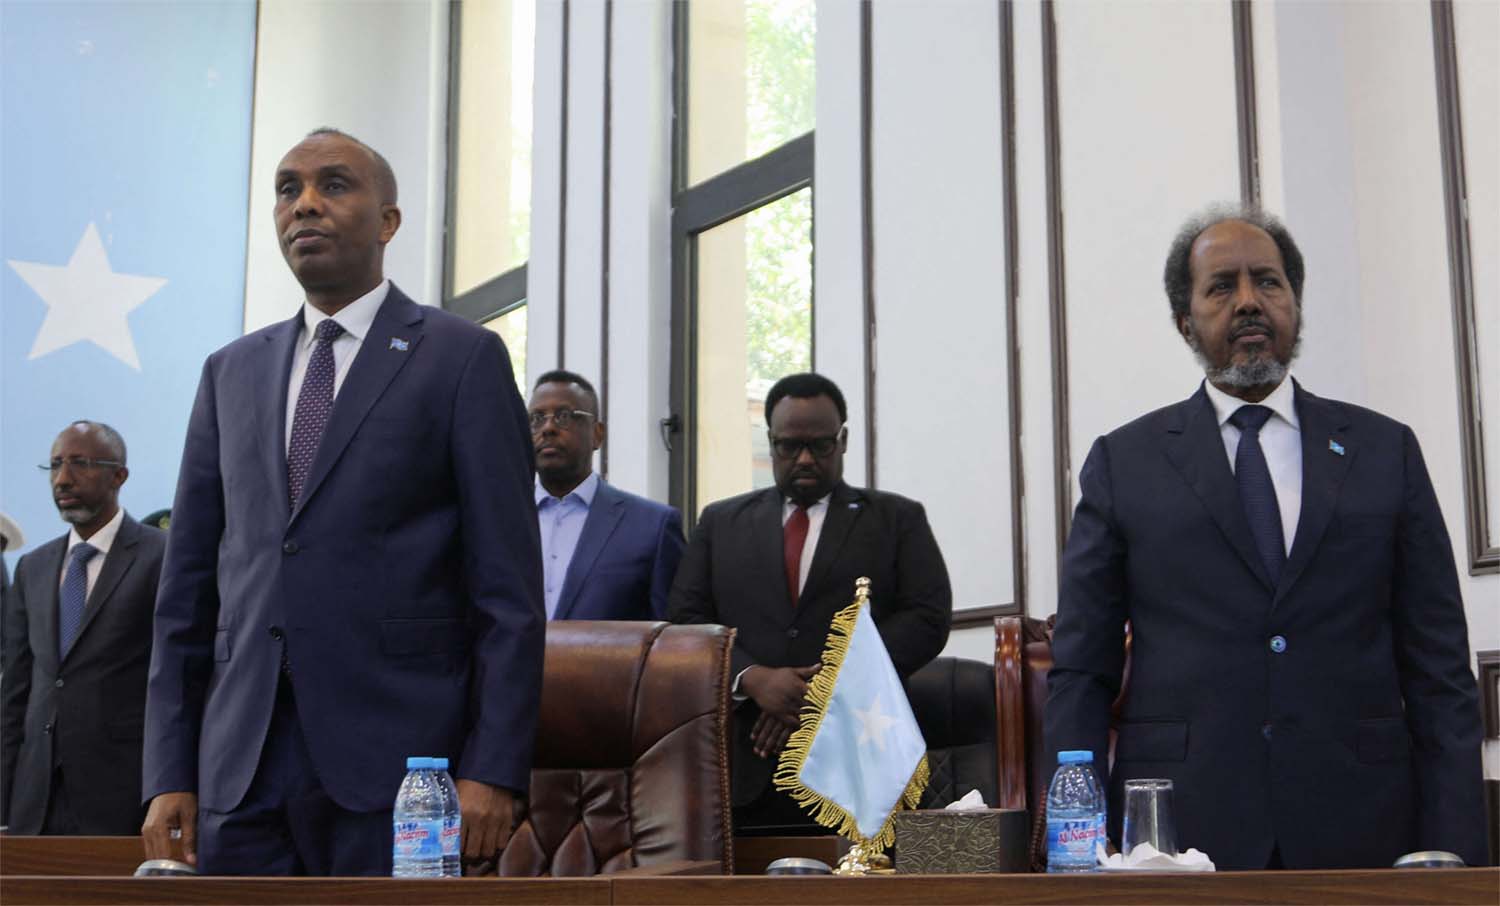 Somalia summoned its ambassador to Ethiopia for deliberations over the agreement